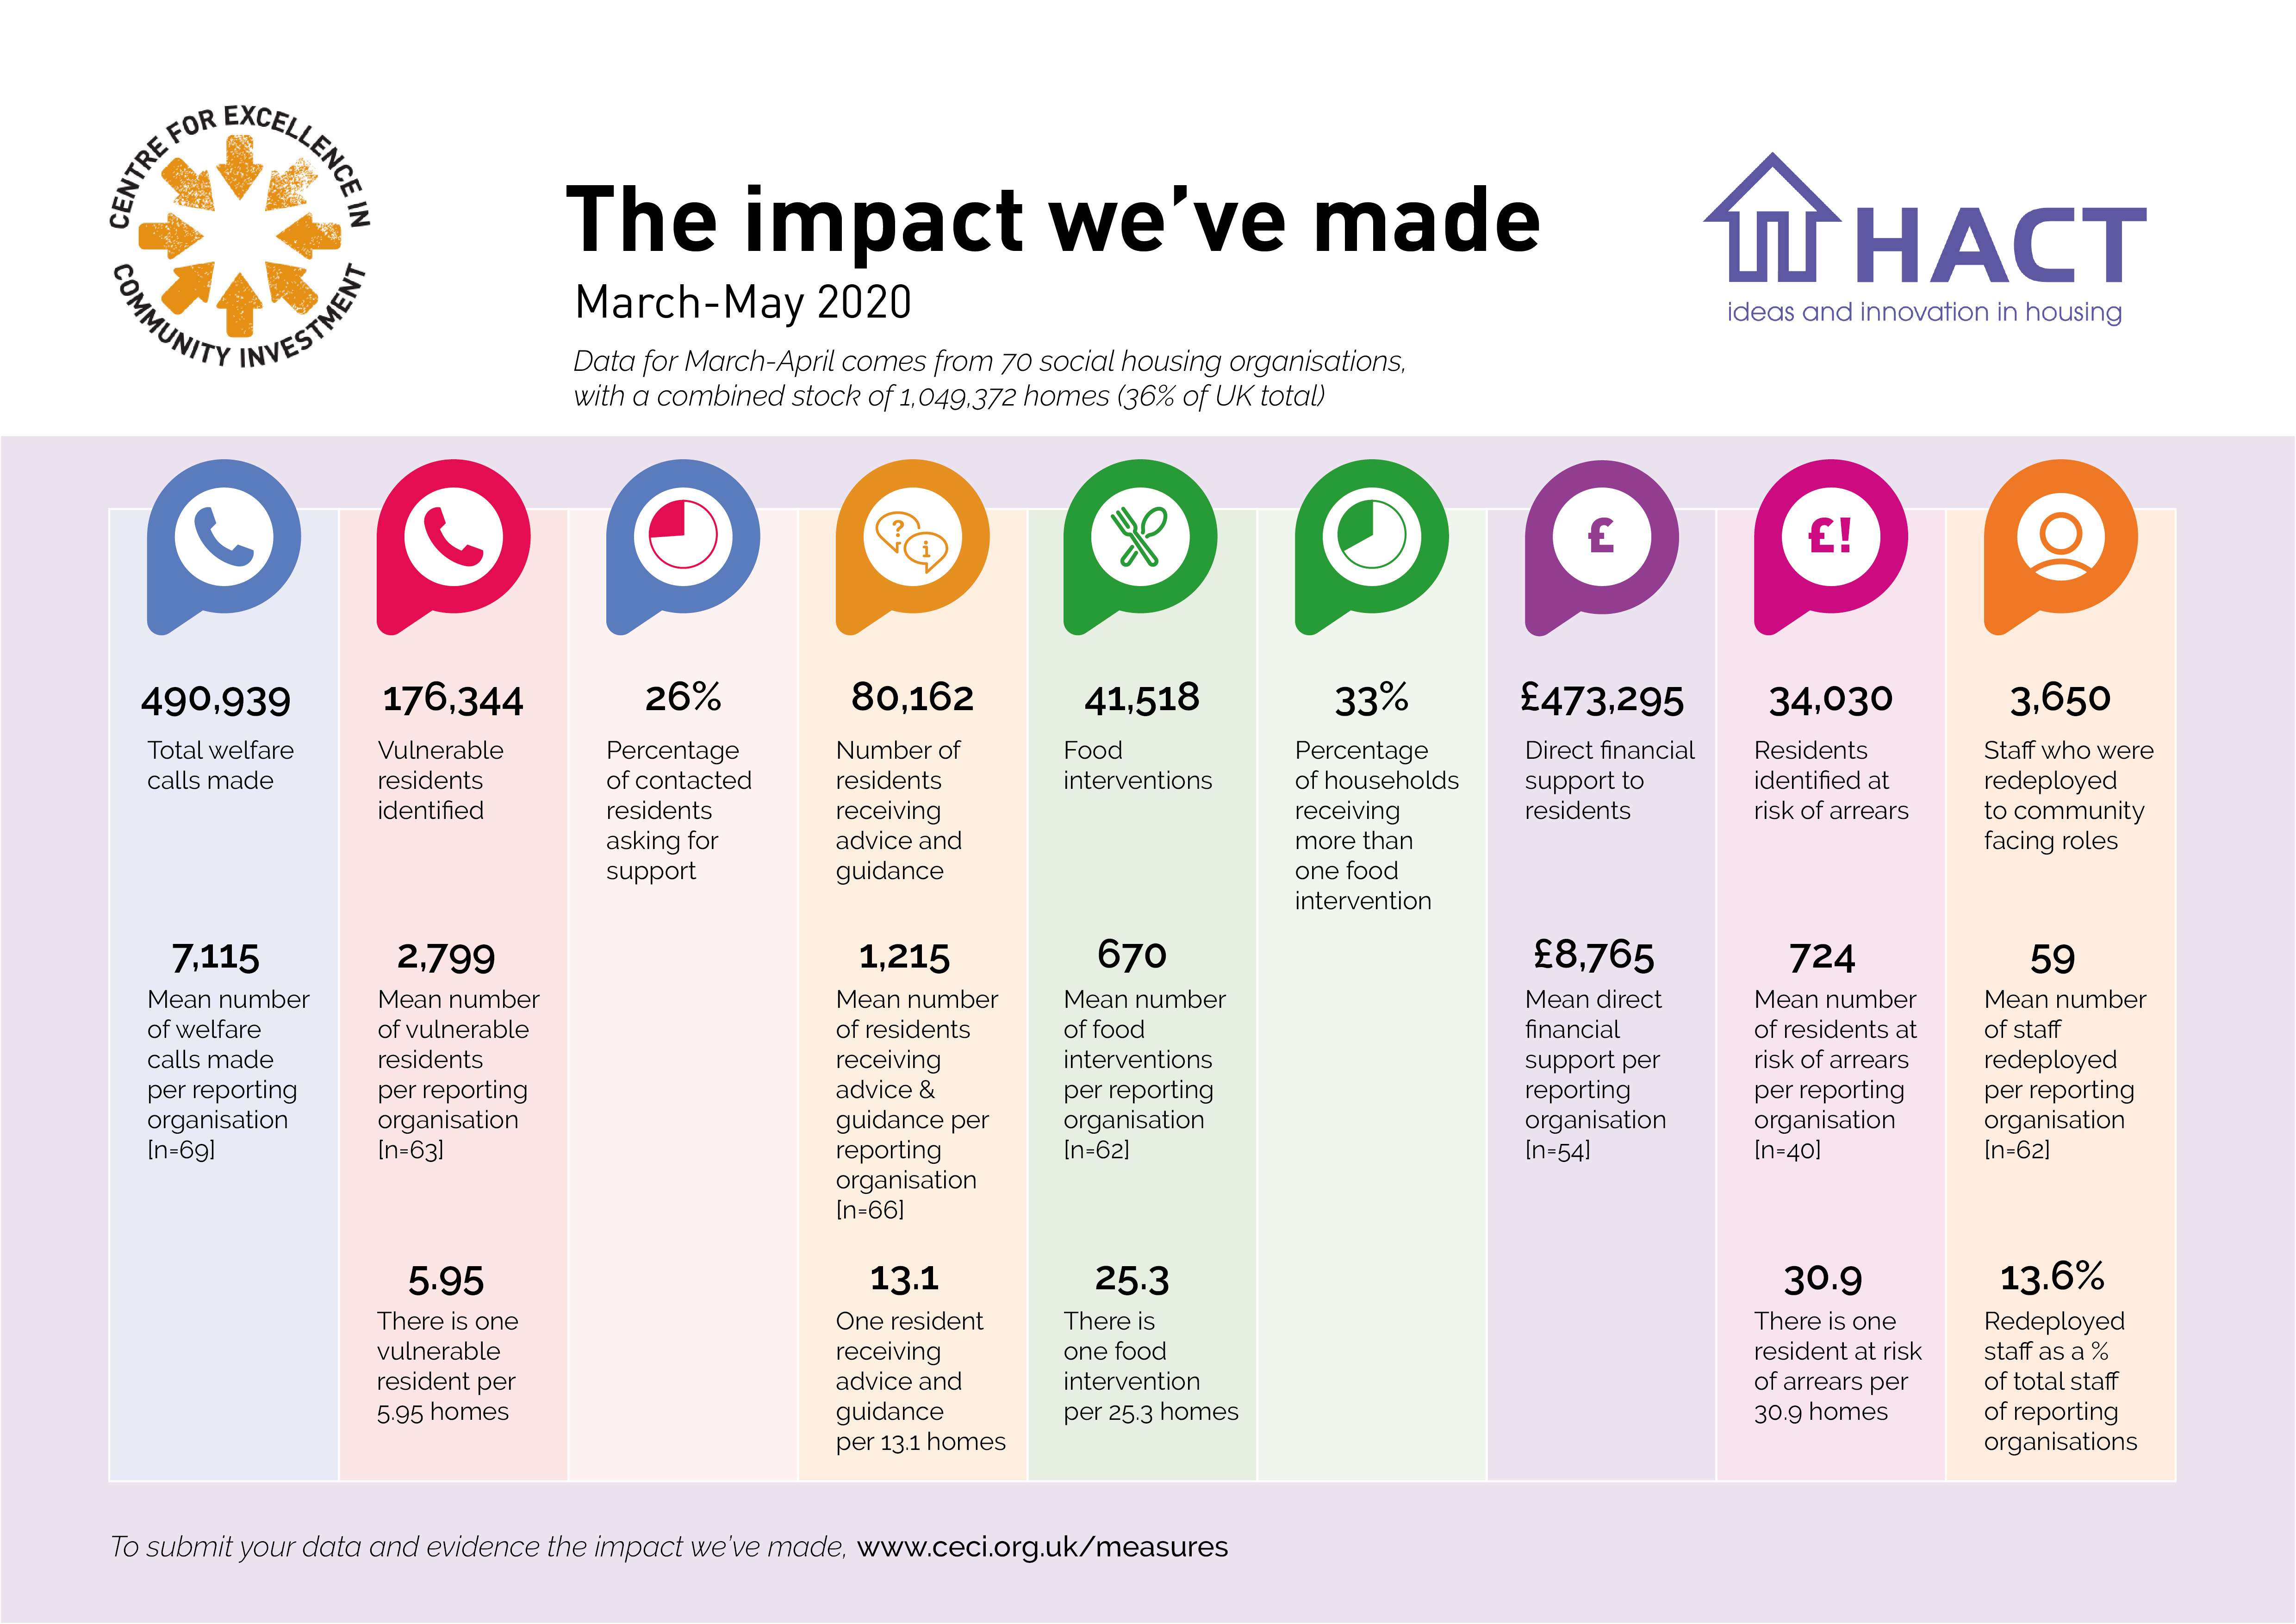 HACT evaluation reveals continued impact of UK social housing sector